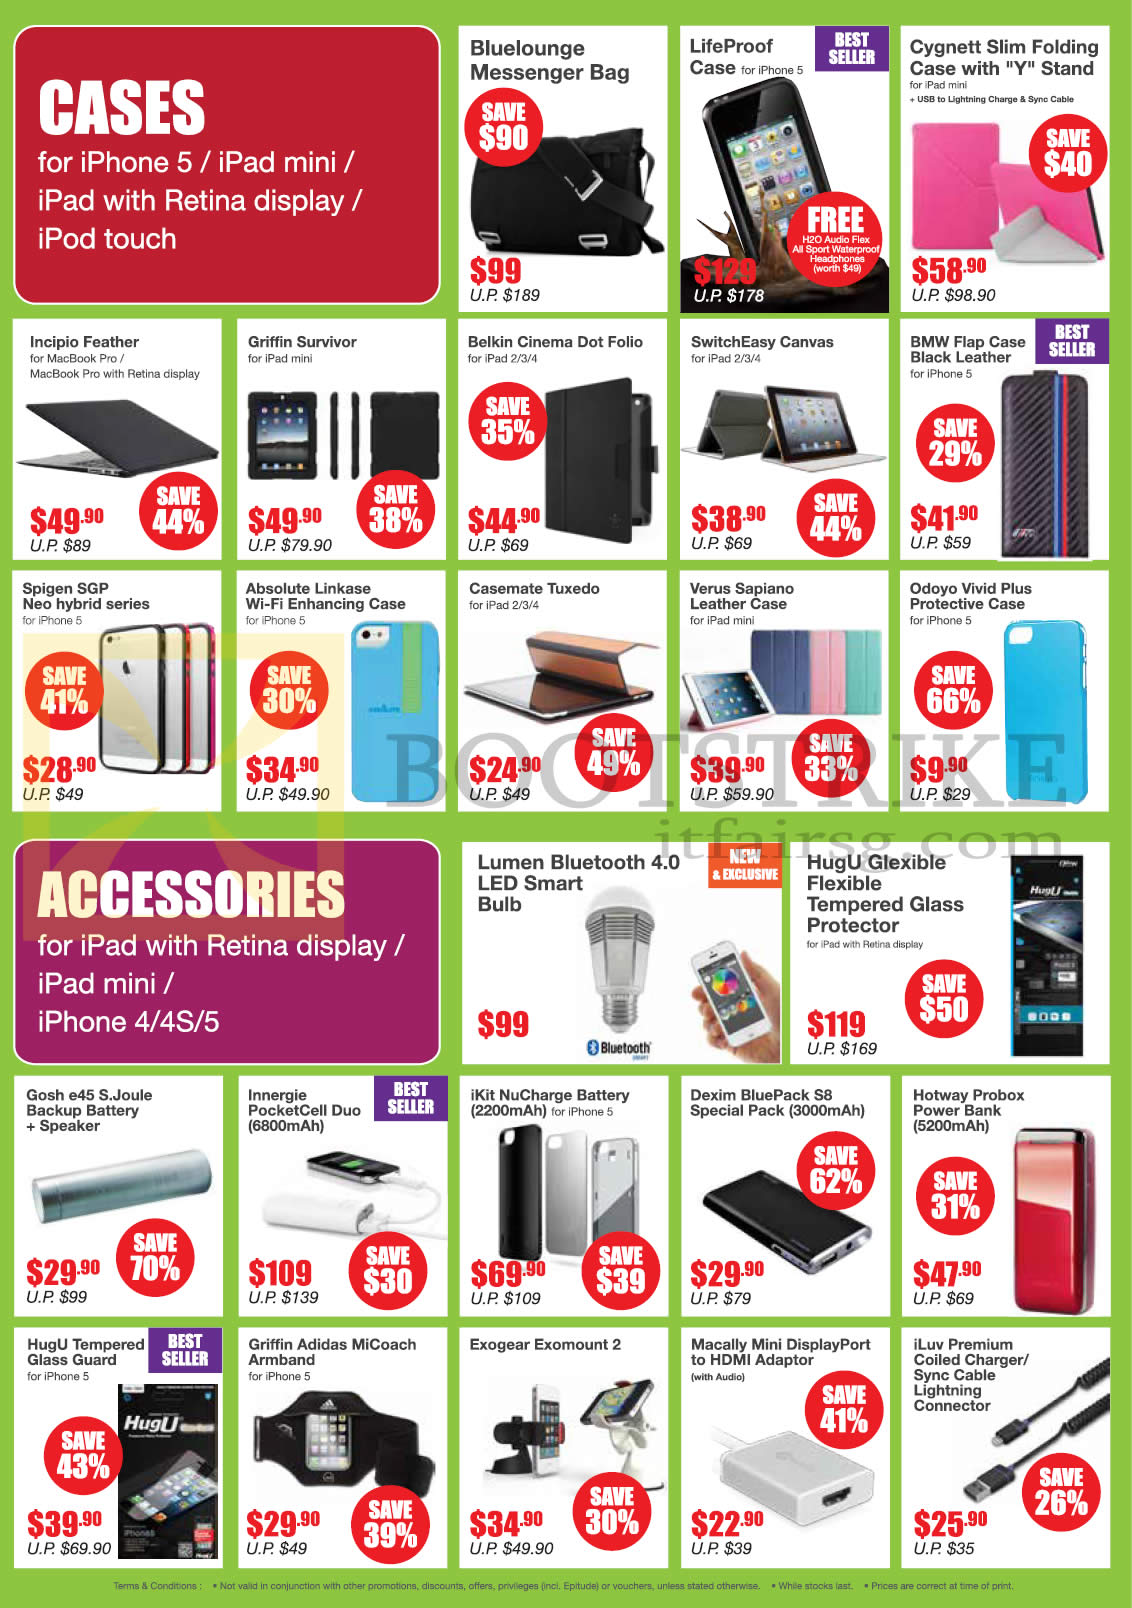 PC SHOW 2013 price list image brochure of EpiCentre Cases IPhone 4S 5 IPad IPod, Bluelounge, Cygnett, Accessories, HugU, Griffin